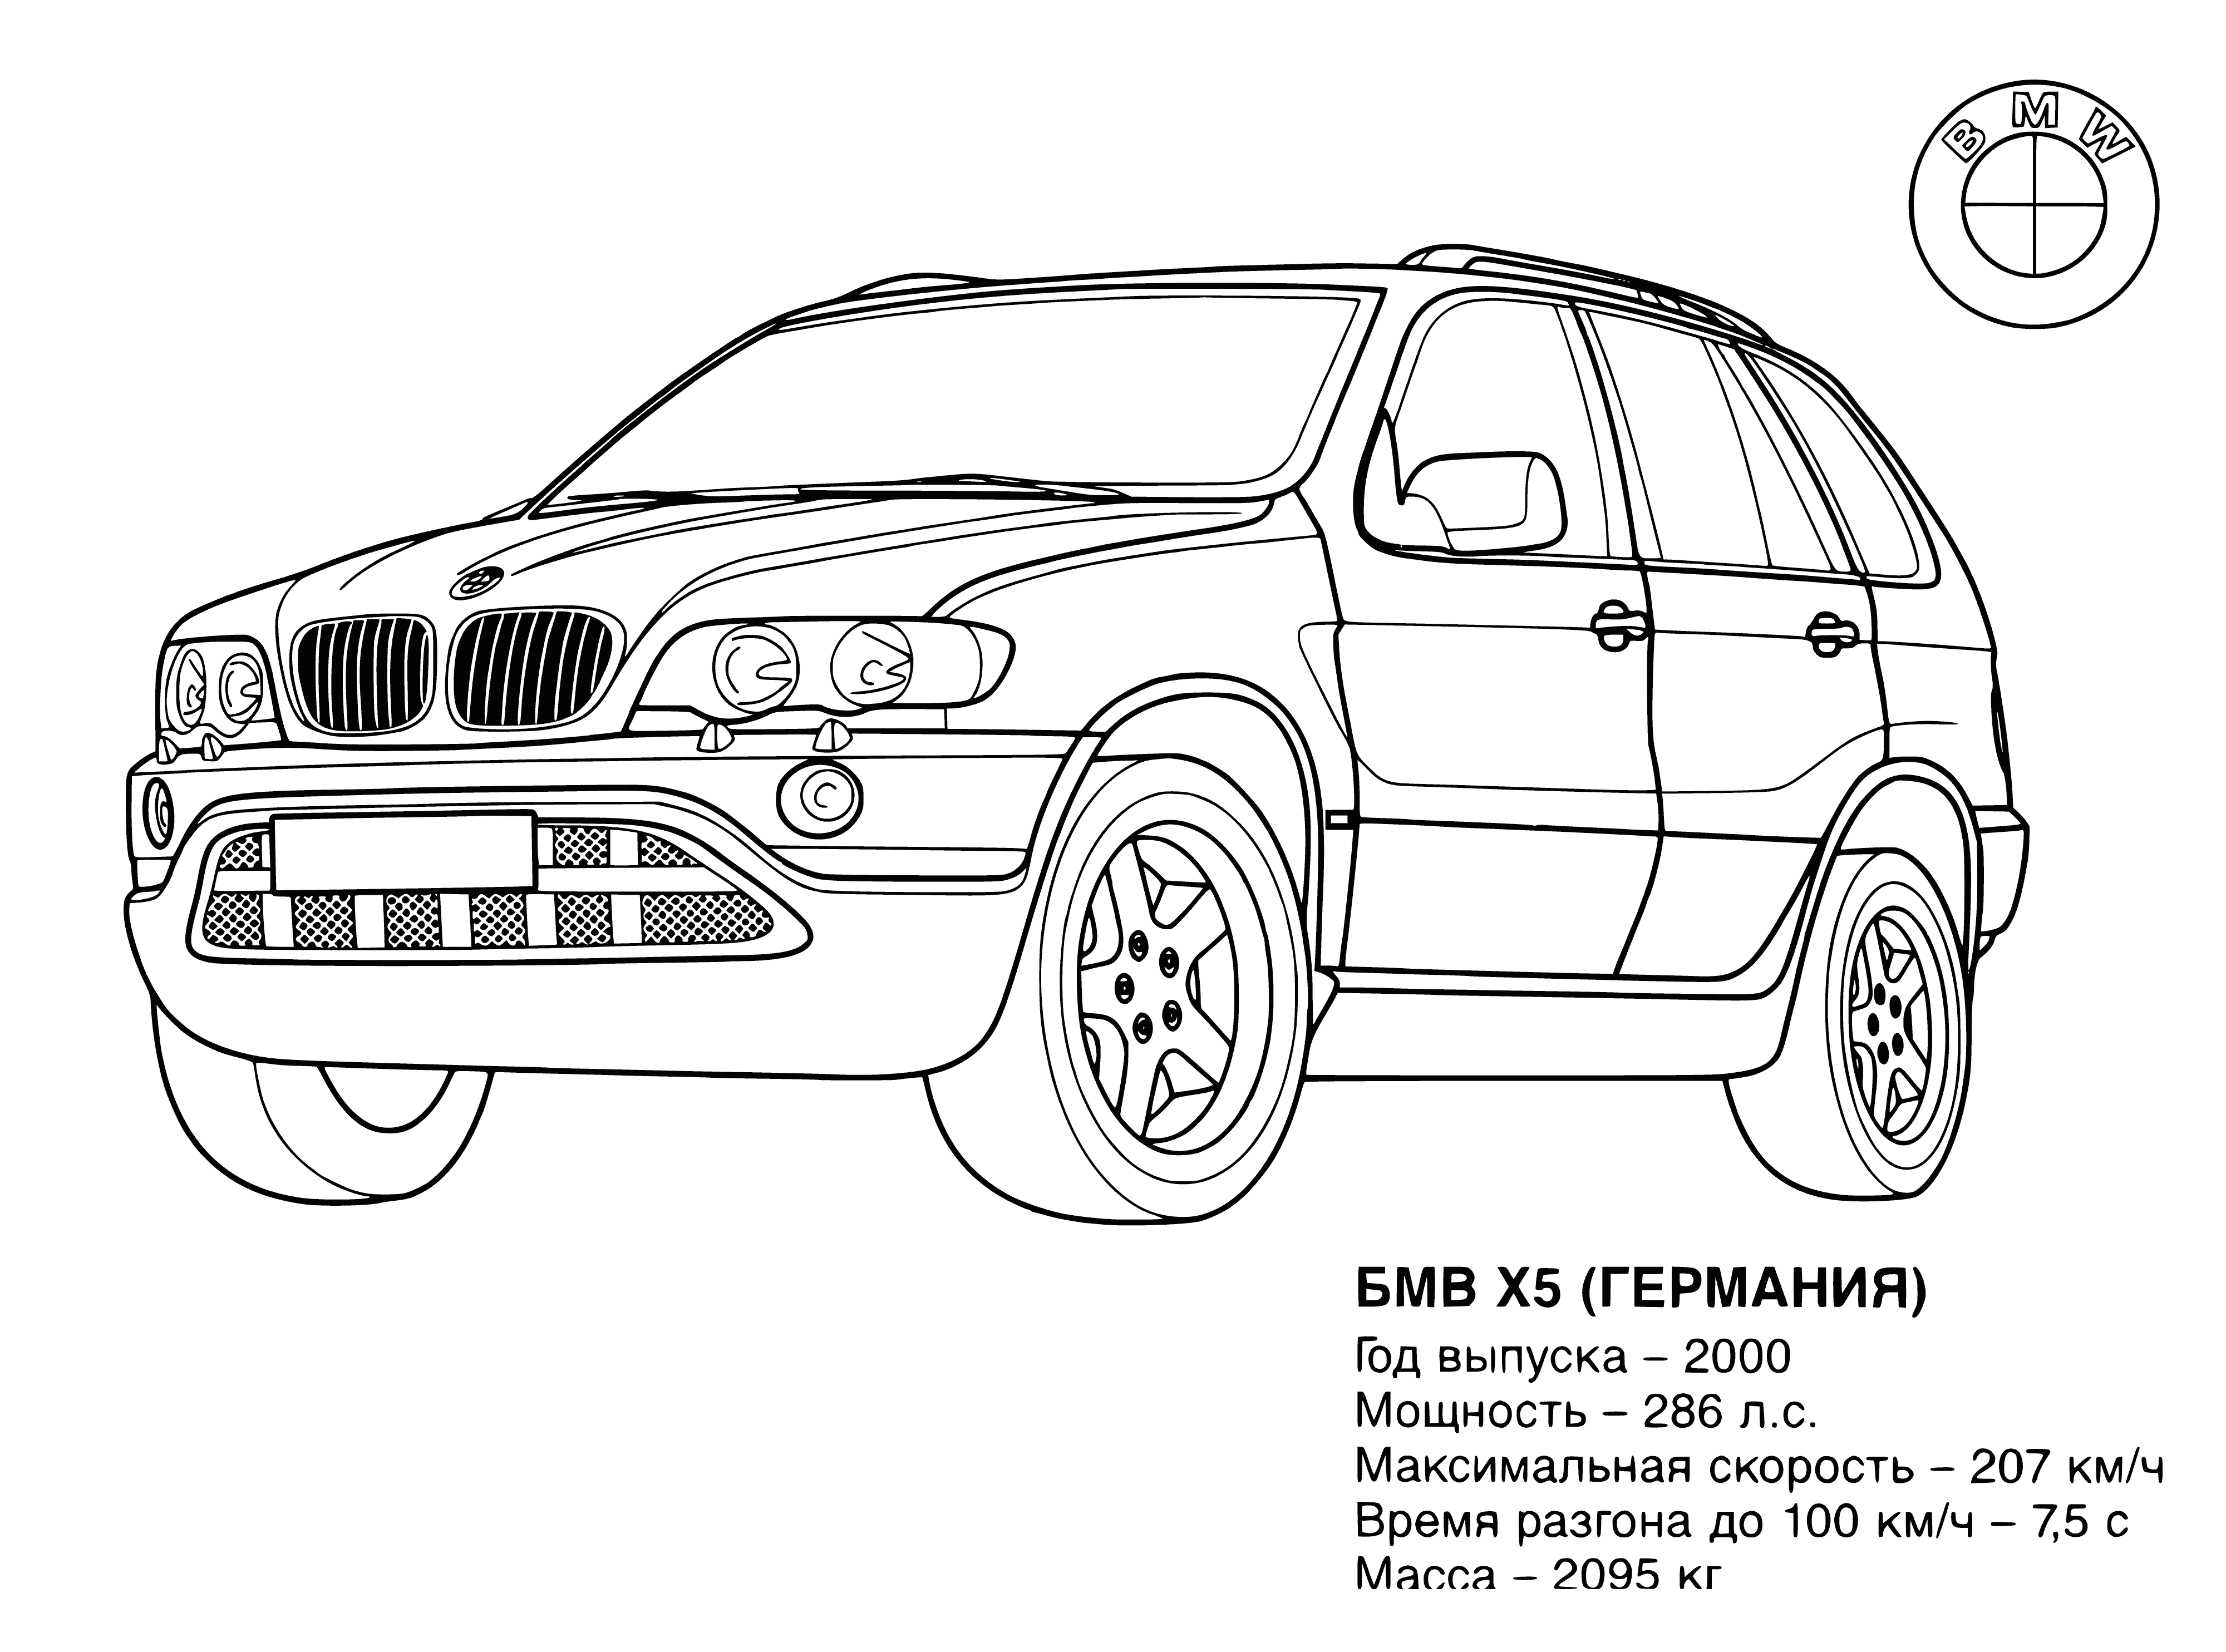 BMW (Germany) coloring page